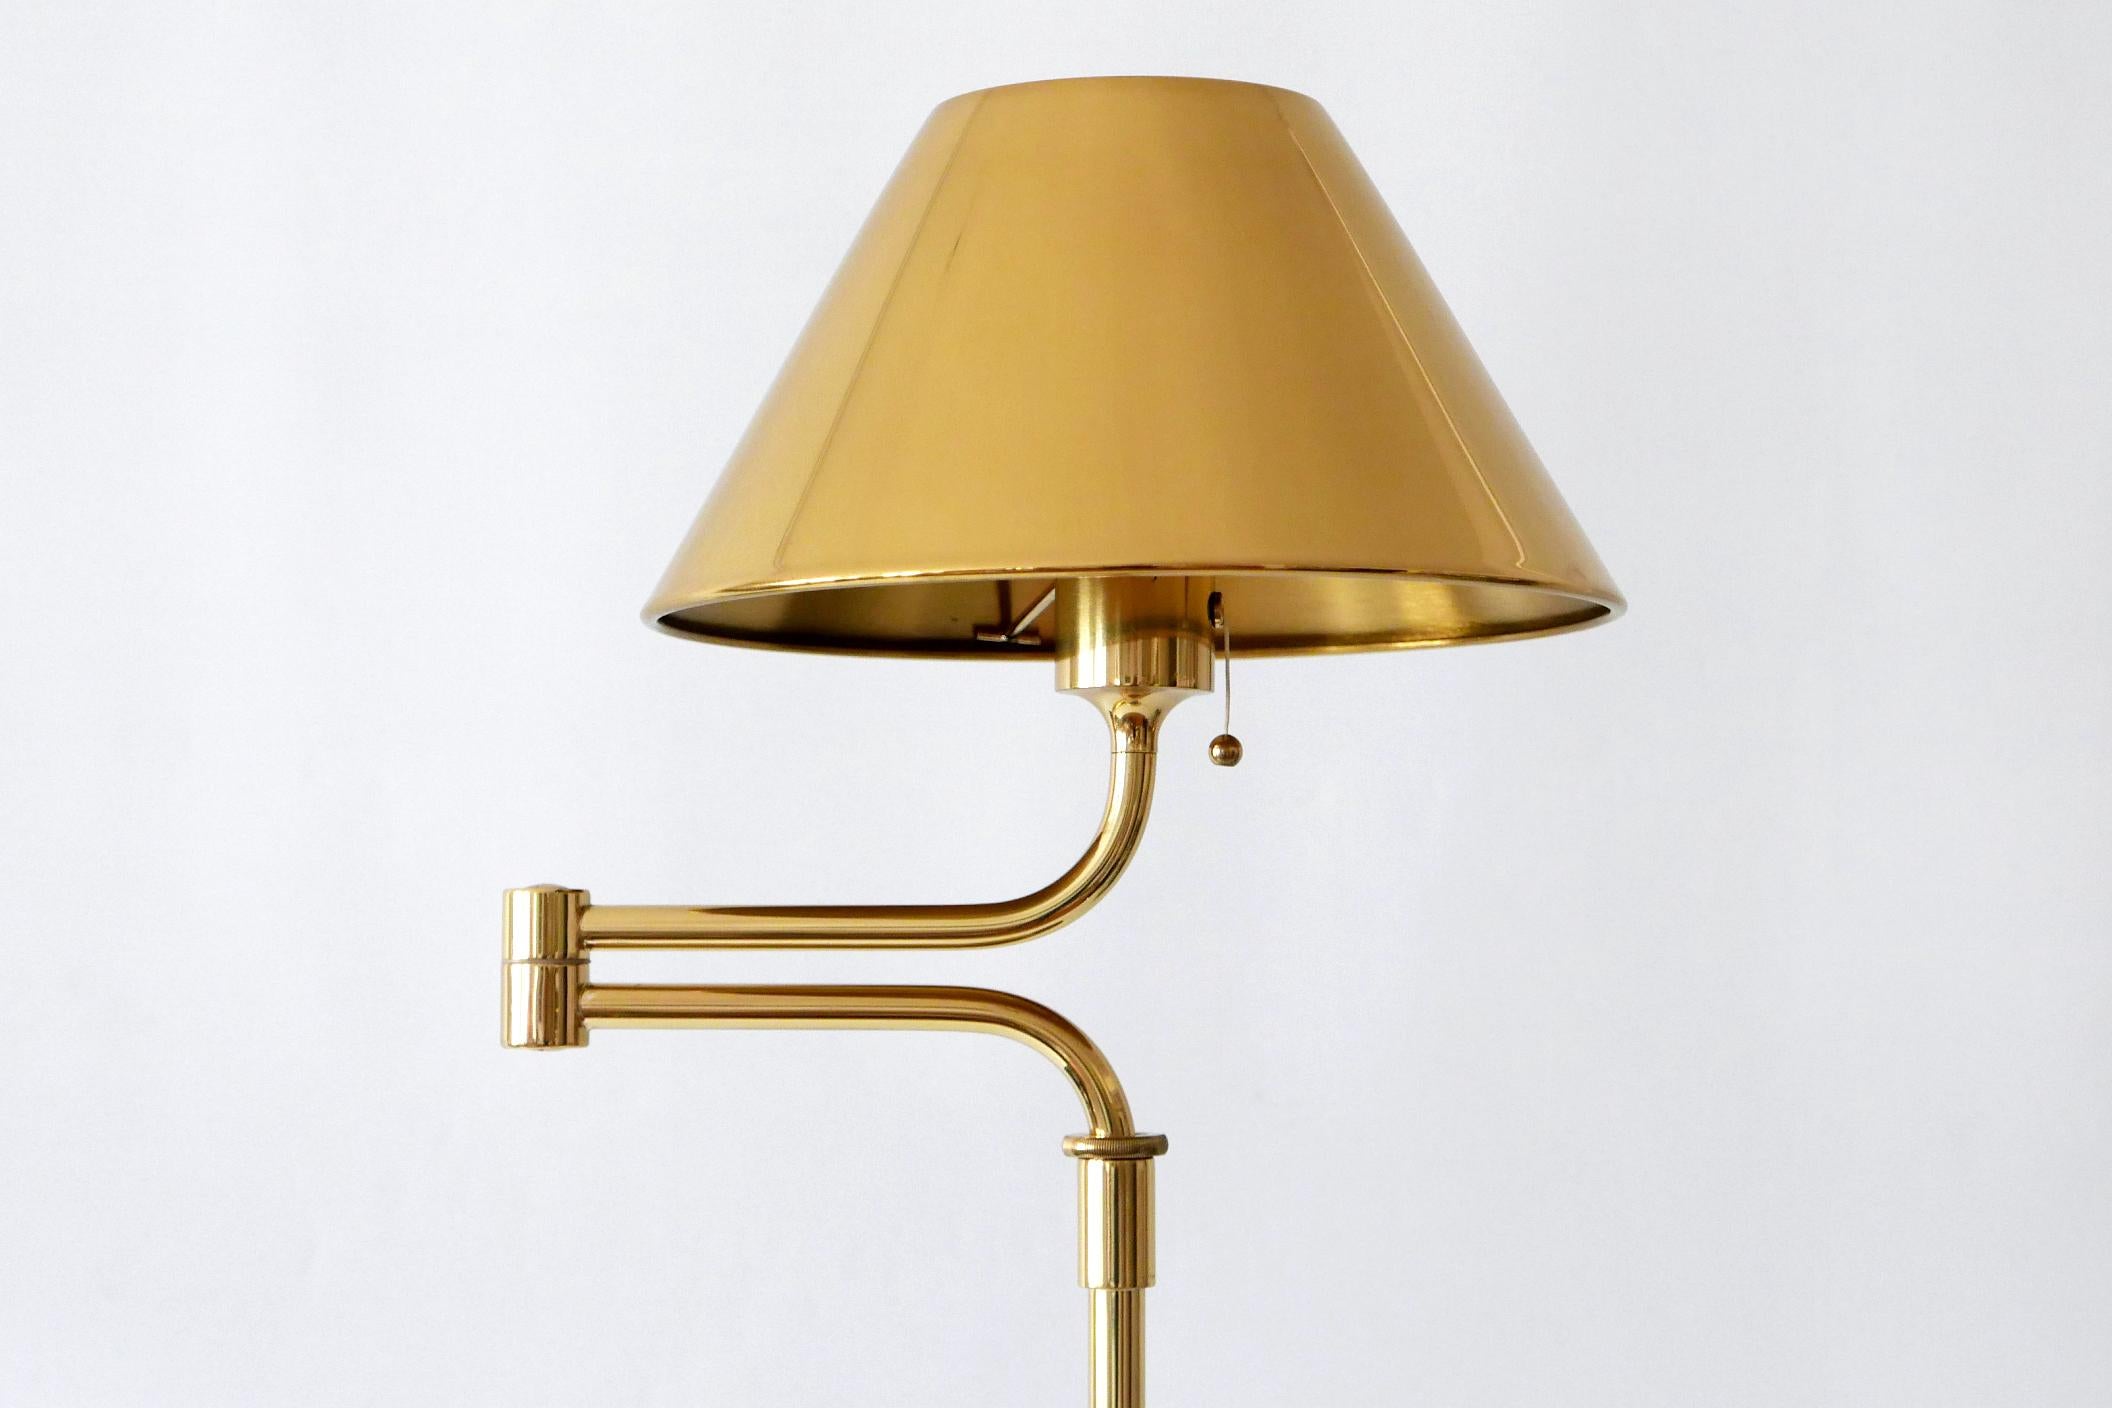 Articulated Brass Floor Lamp or Reading Light by Florian Schulz 1980s Germany 1